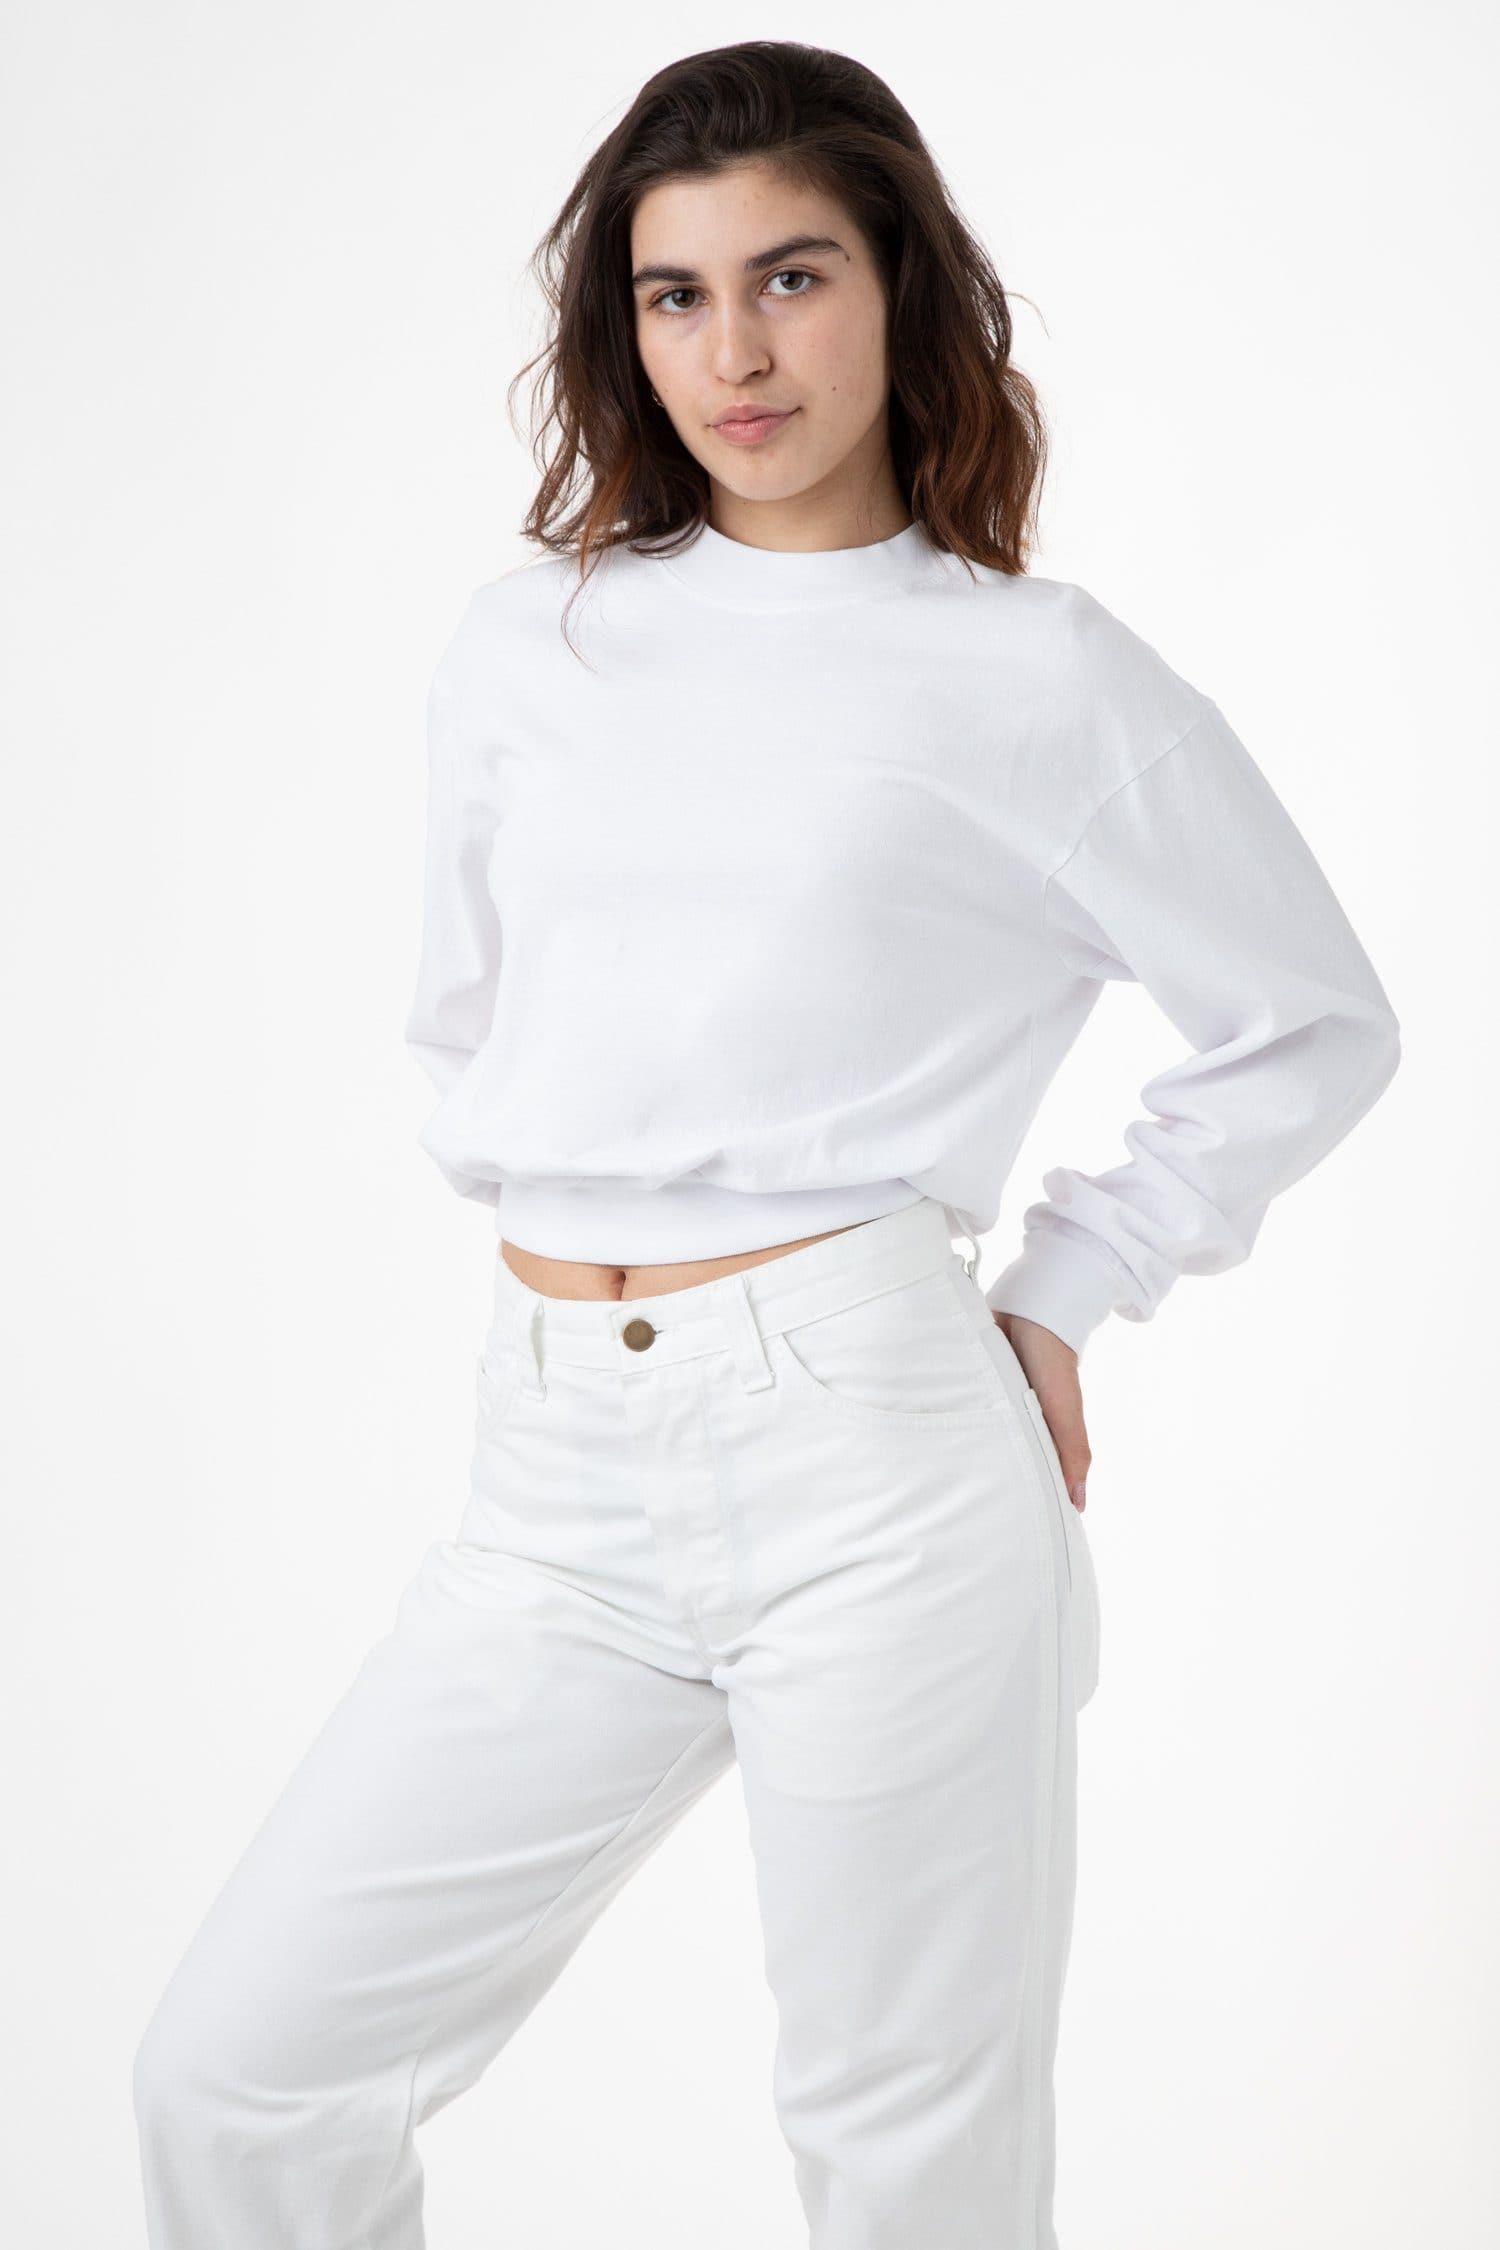 Los Angeles Apparel | Long Sleeve Garment Dye Cropped Mockneck for Women in White, Size Small